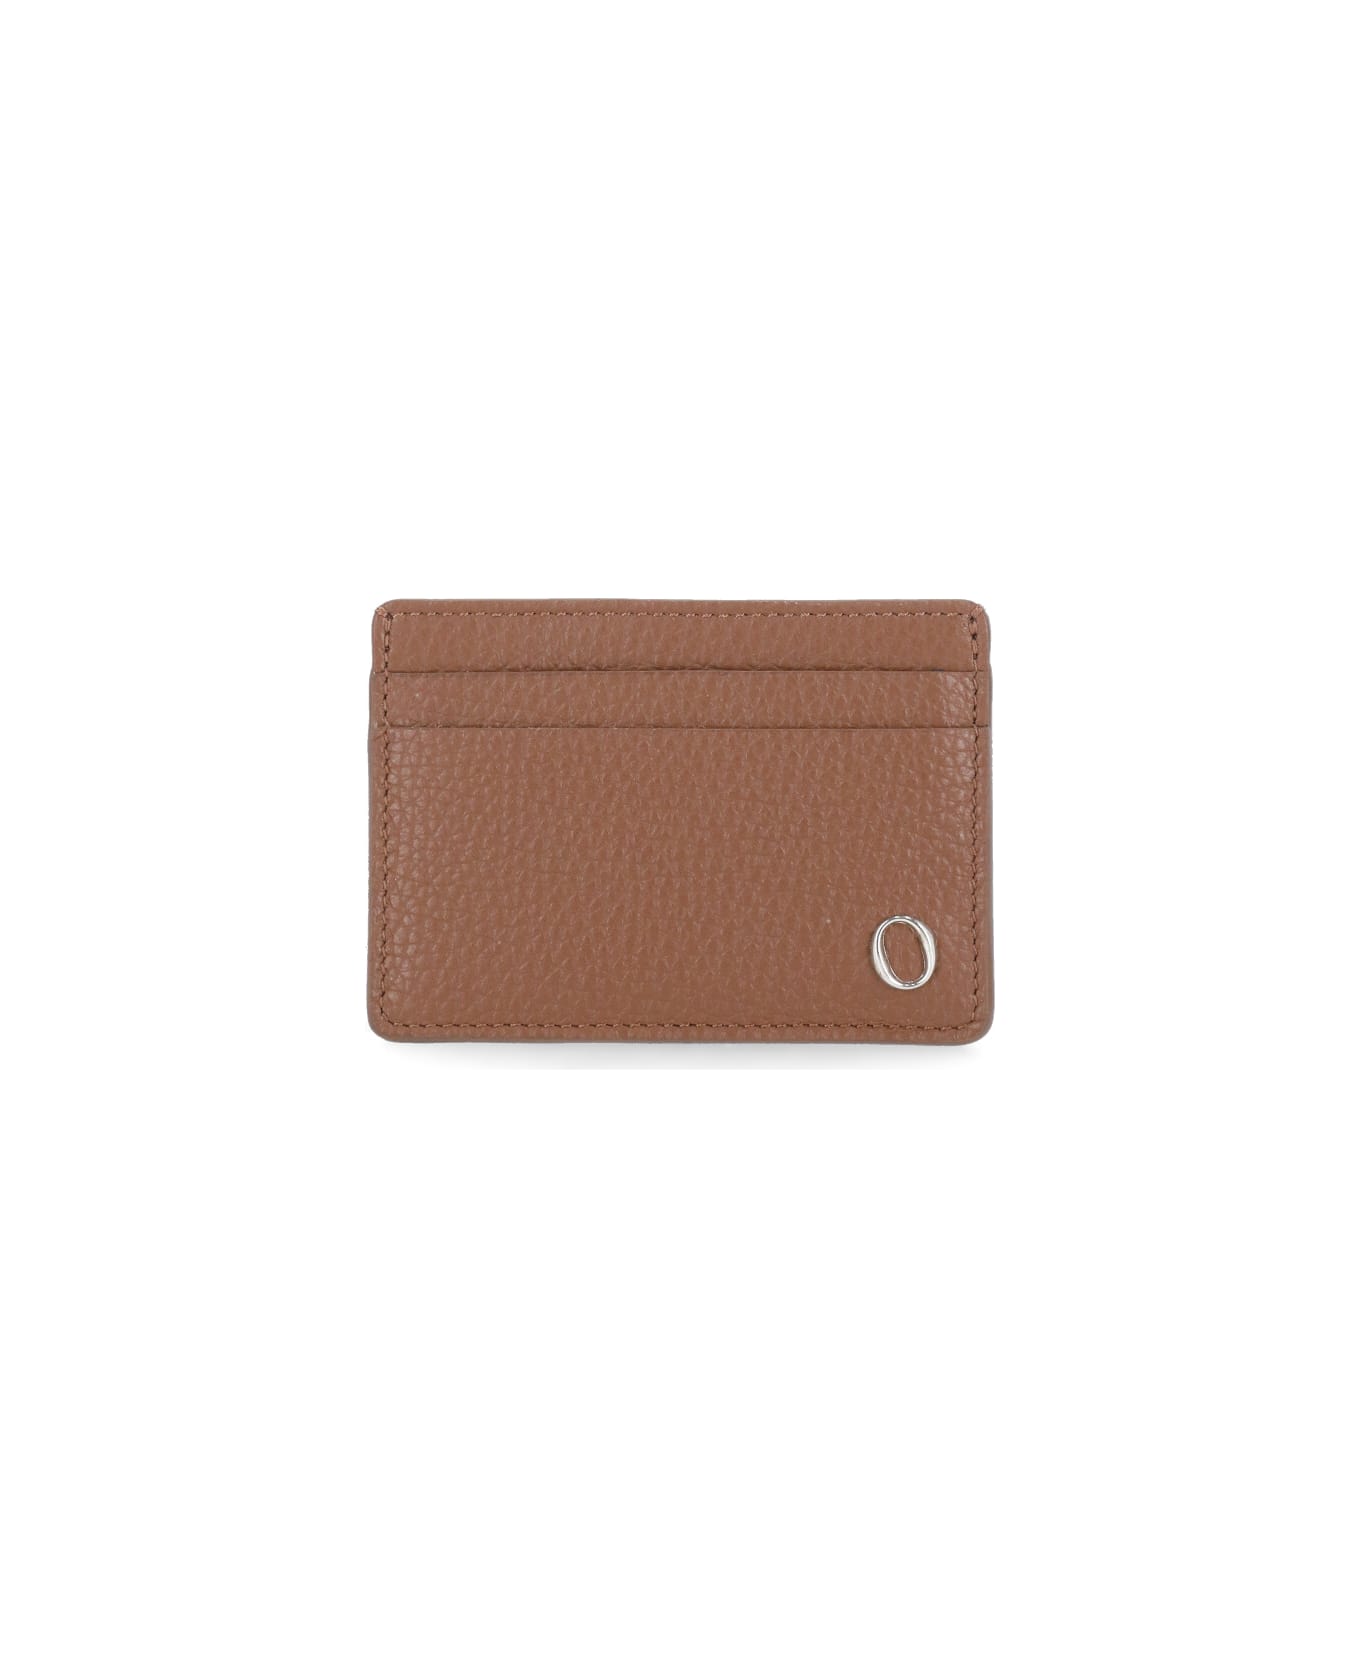 Orciani Micron Leather Cards Holder - Brown 財布